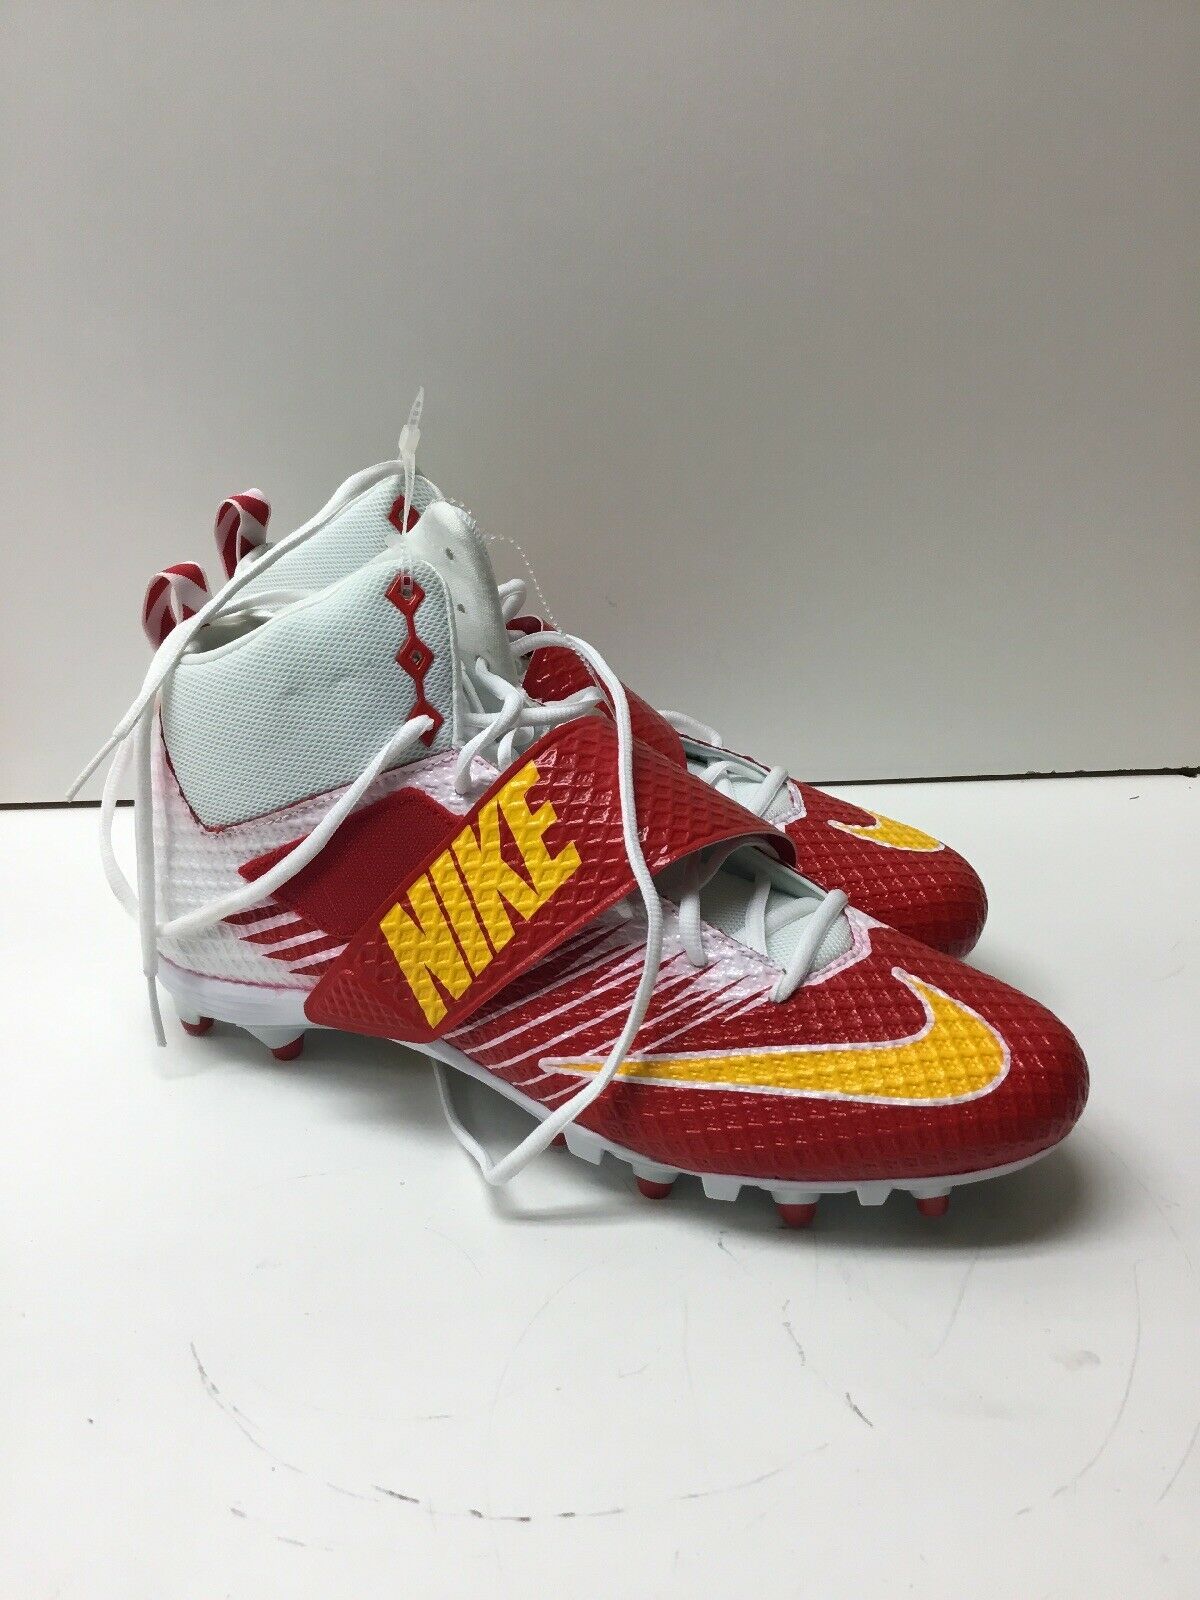 Nike Strike Pro High Top Red/White Football Cleats Size 13.5 US. NWOT - Men